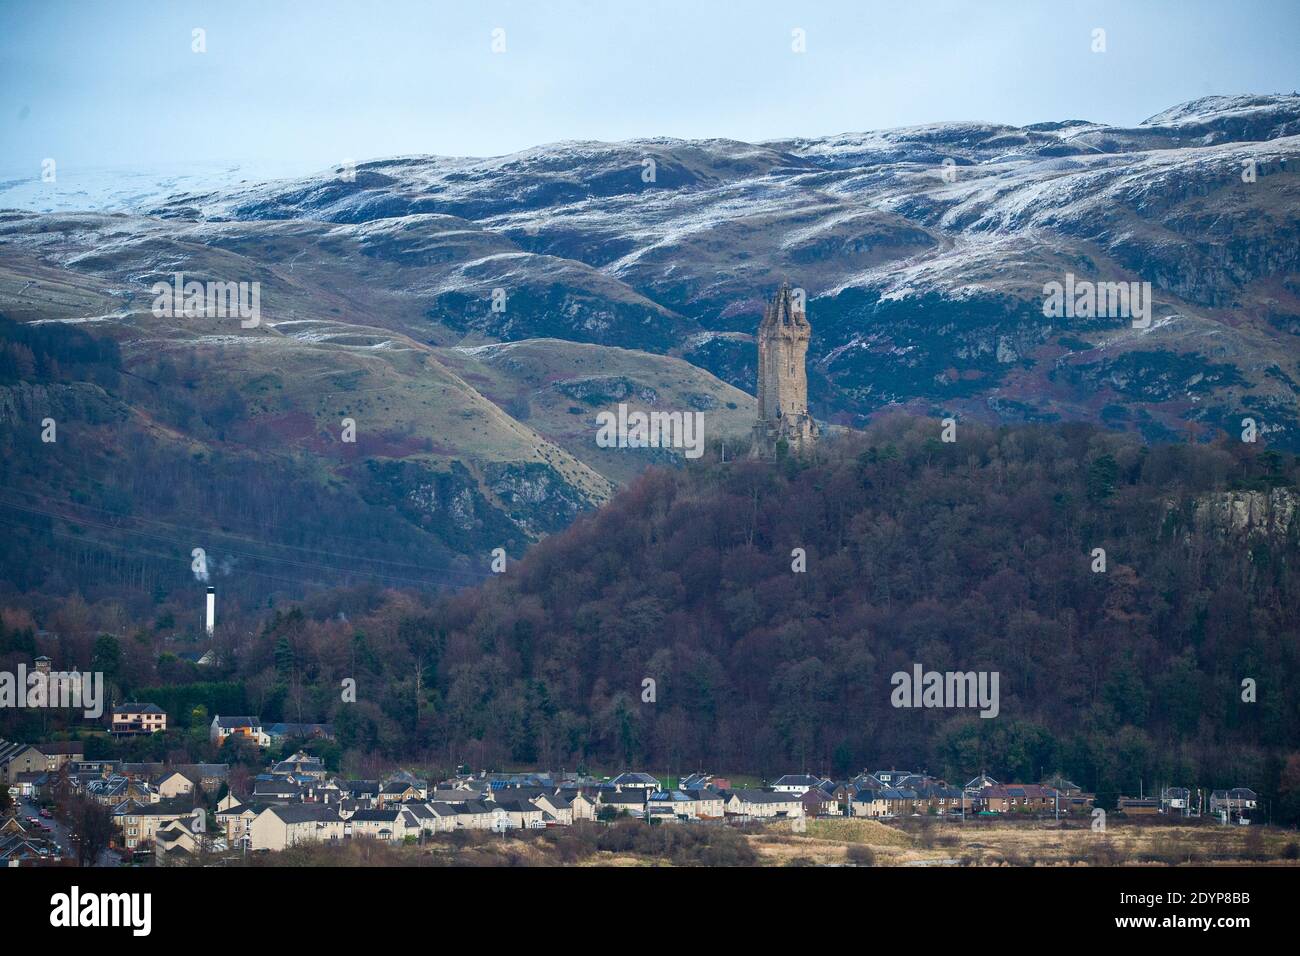 Stirling, Scotland, UK. 27th Dec, 2020. Pictured: Day two of the festive phase 4 lockdown for mainland Scotland. A small window in the weather emerges from the yellow weather warning which was issued as Storm Bella gives snow fall over night leaving a dusting of white on the Ochill Hills. Credit: Colin Fisher/Alamy Live News Stock Photo